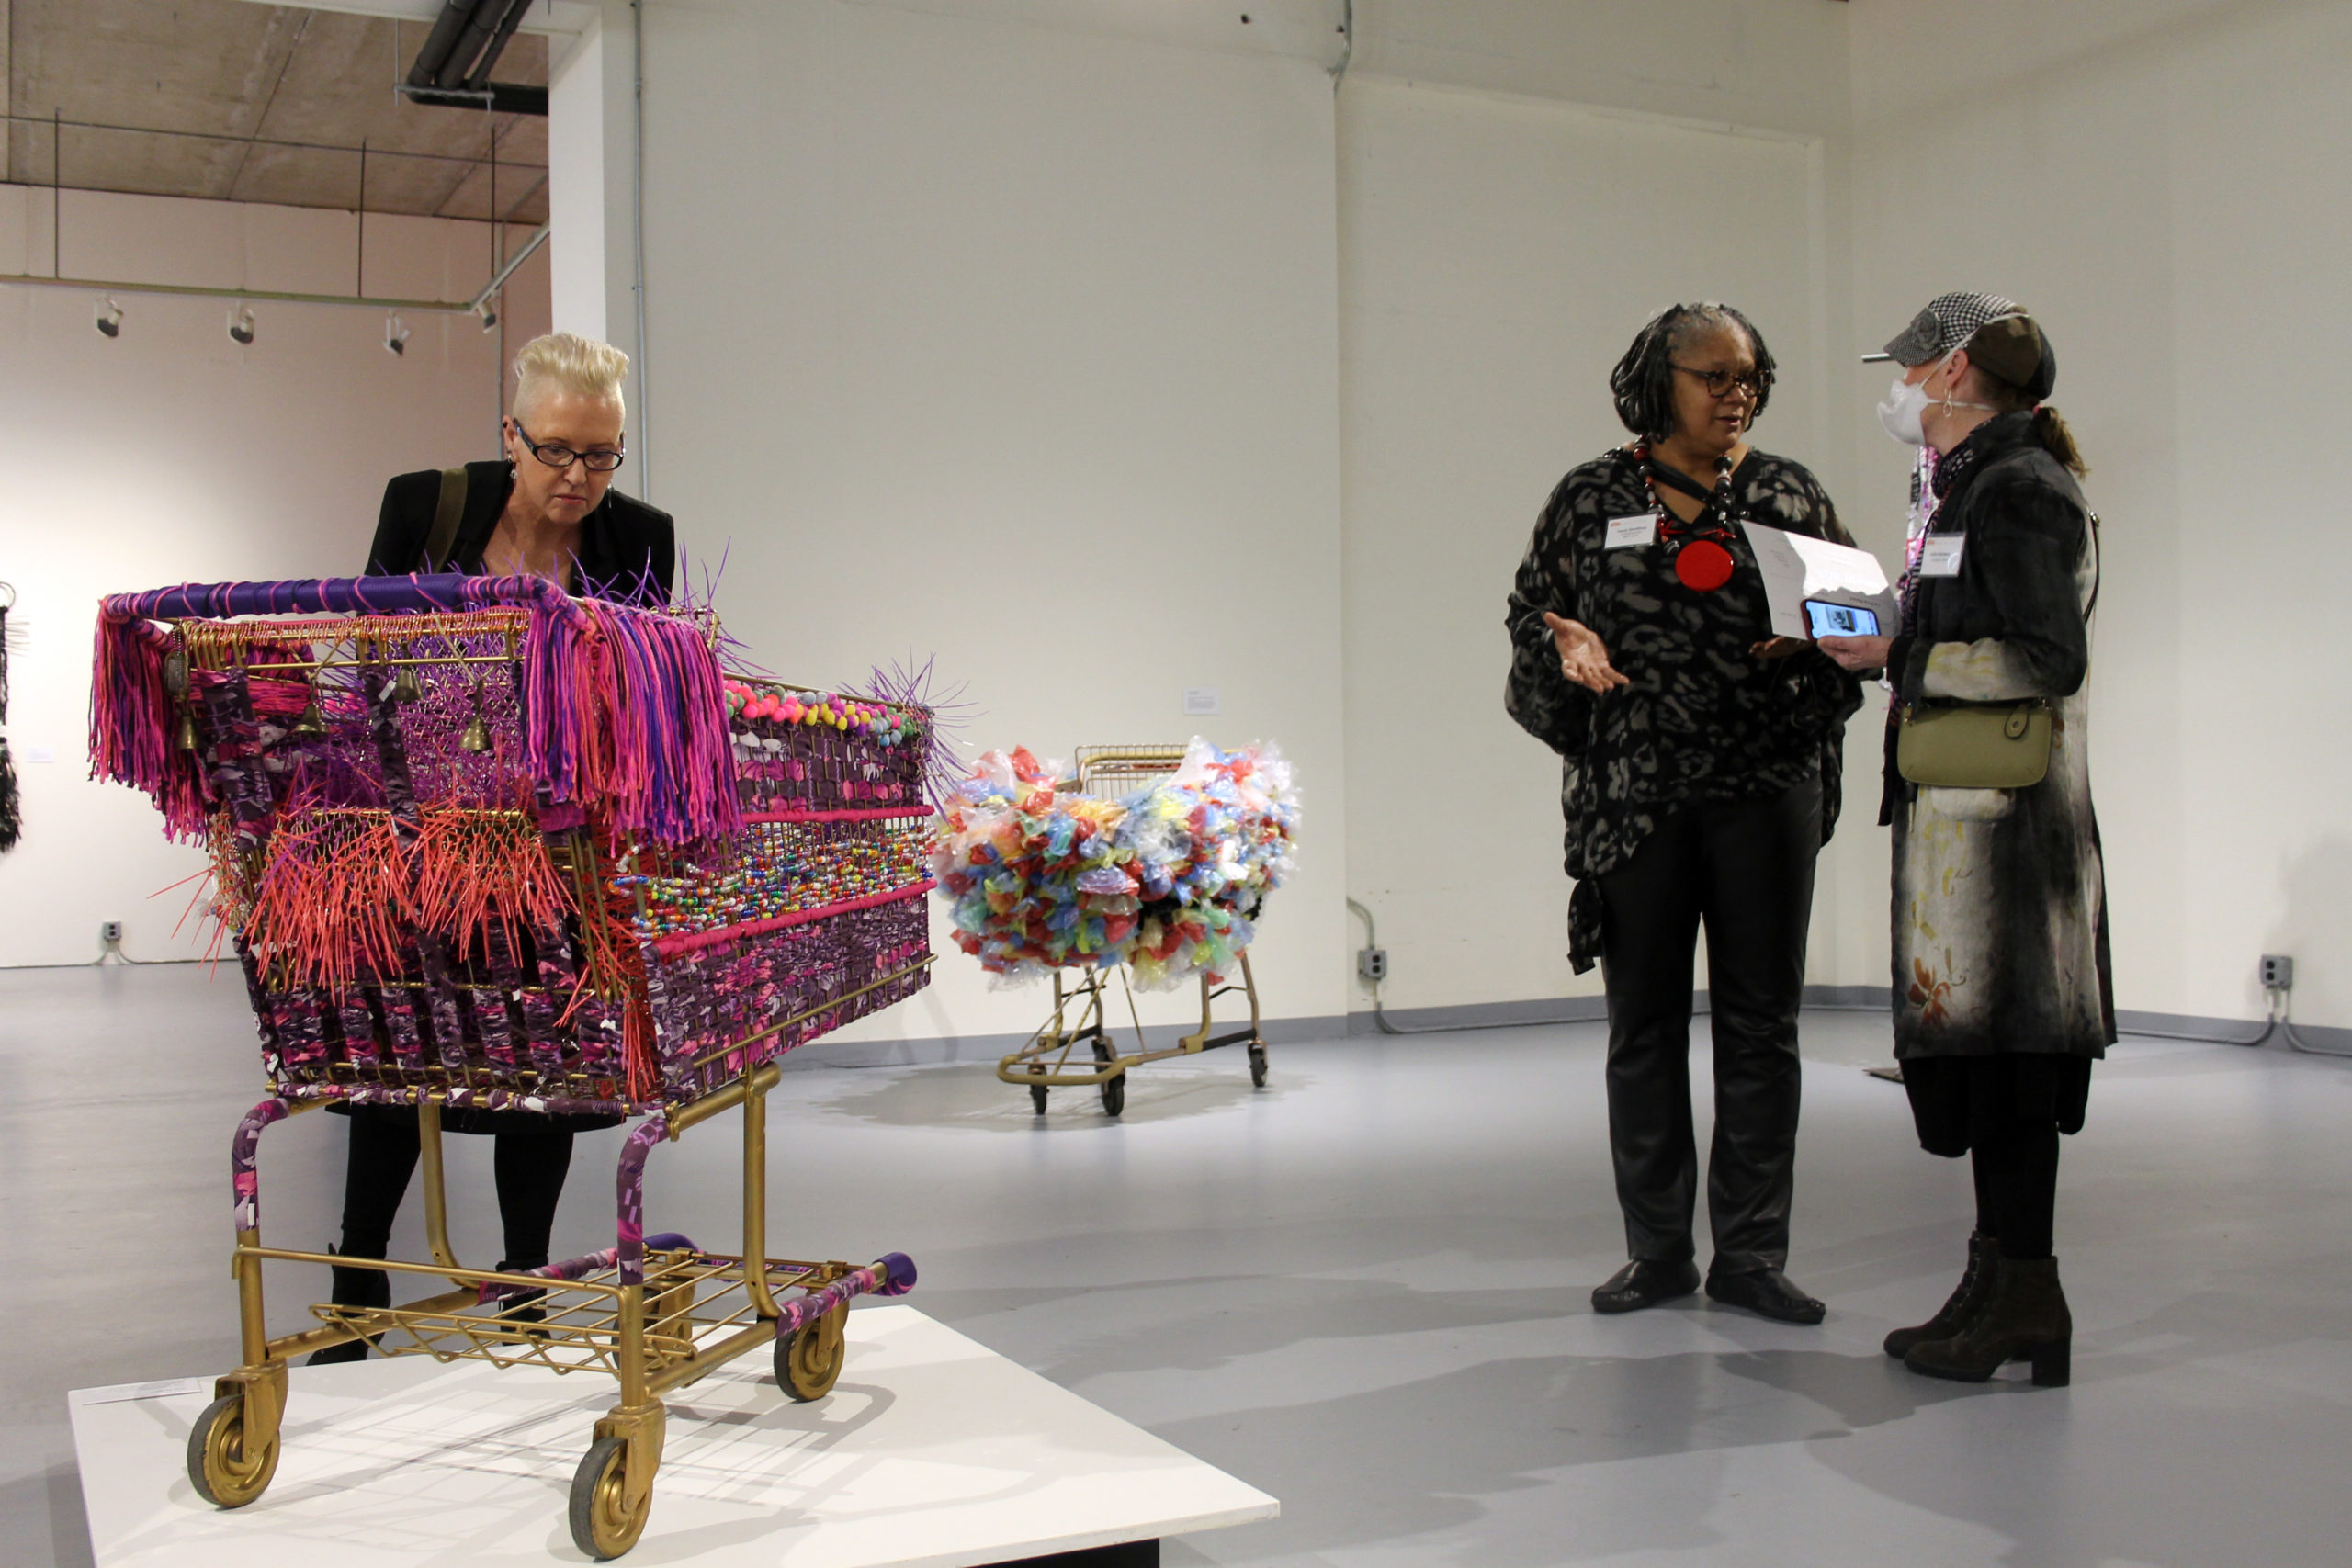 Two women, including artist Theda Sandiford, stand and talk on the right half of the image while another woman with very light hair and glasses closely examines a grocery cart festooned with ribbons, beads, and zip ties